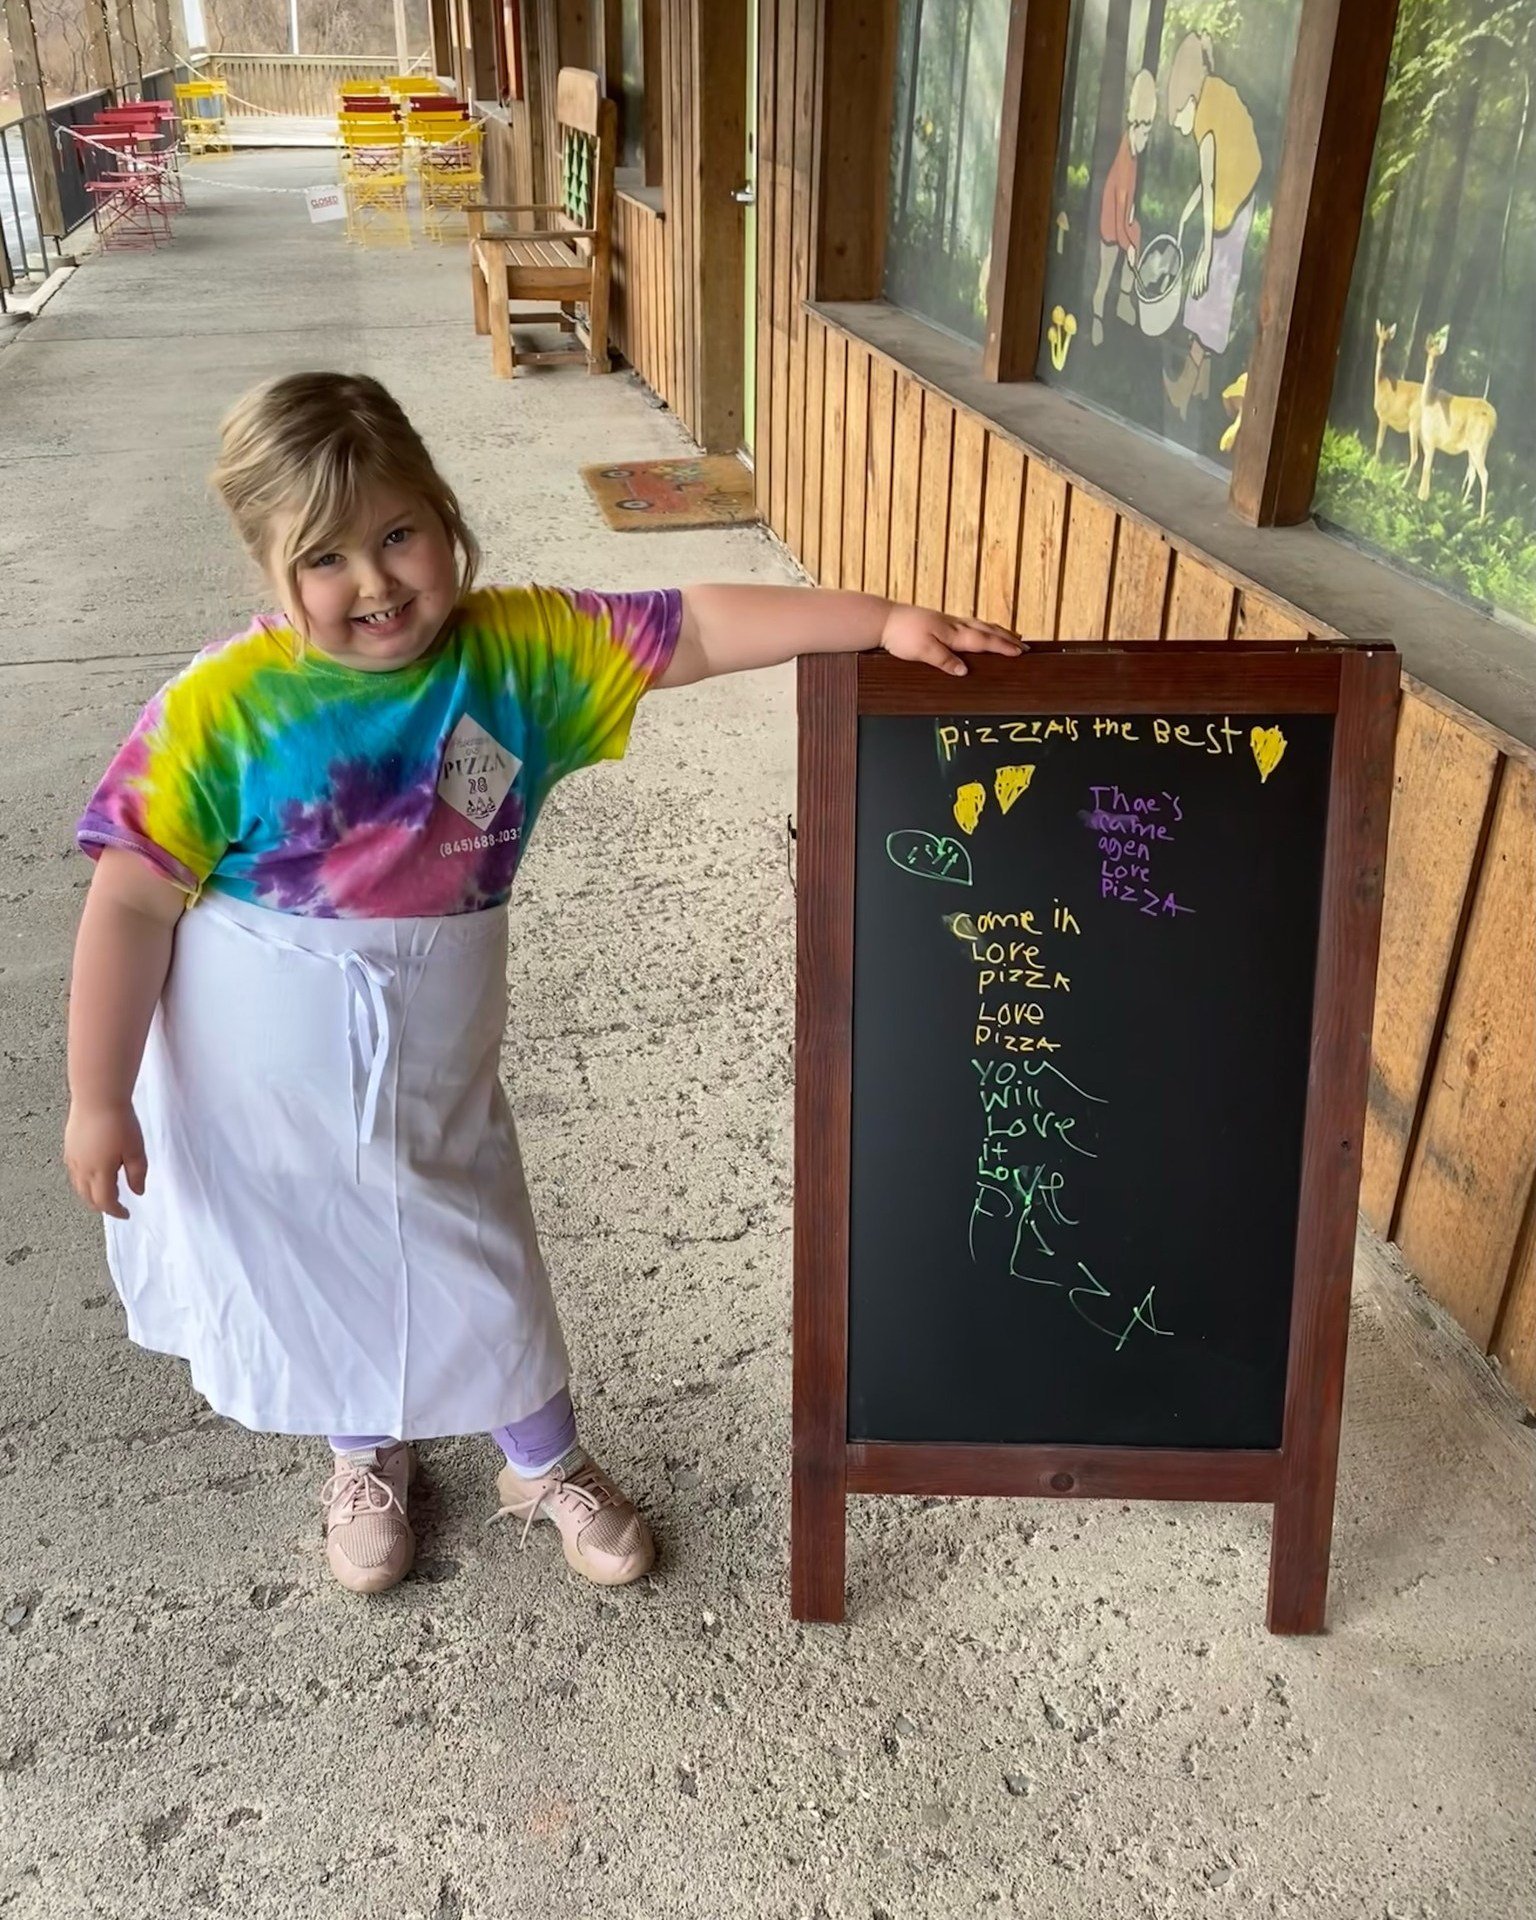 Our star employee Mercy is back at it, hyping up our pizza like the pro she is! Her motto? &quot;Pizza is the best!&quot; - and we couldn't agree more. 🌟🍕

#phoeniciapizza28 #phoenicia #phoeniciaNY #Catskills #Hudsonvalley #phoeniciaeats #catskills